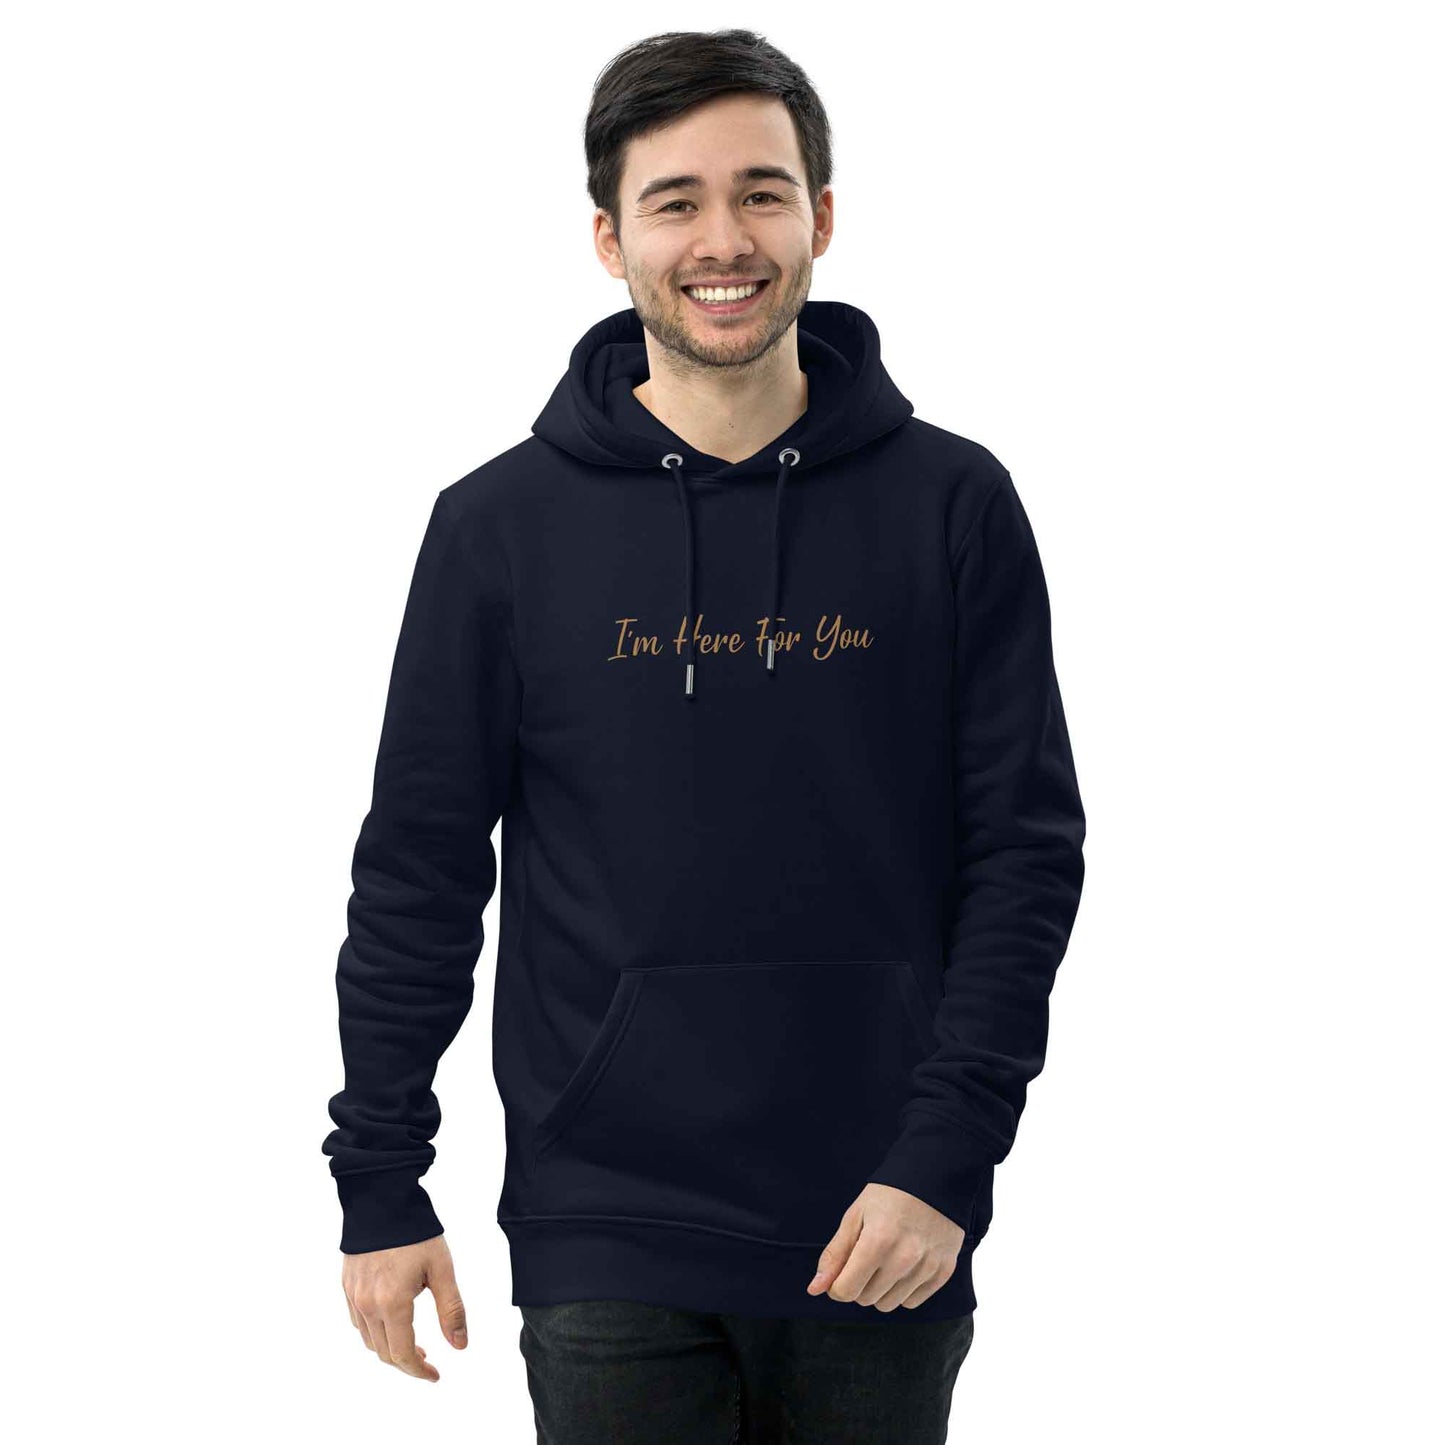 Men black motivational hoodie with inspirational quote, "I'm Here For You."